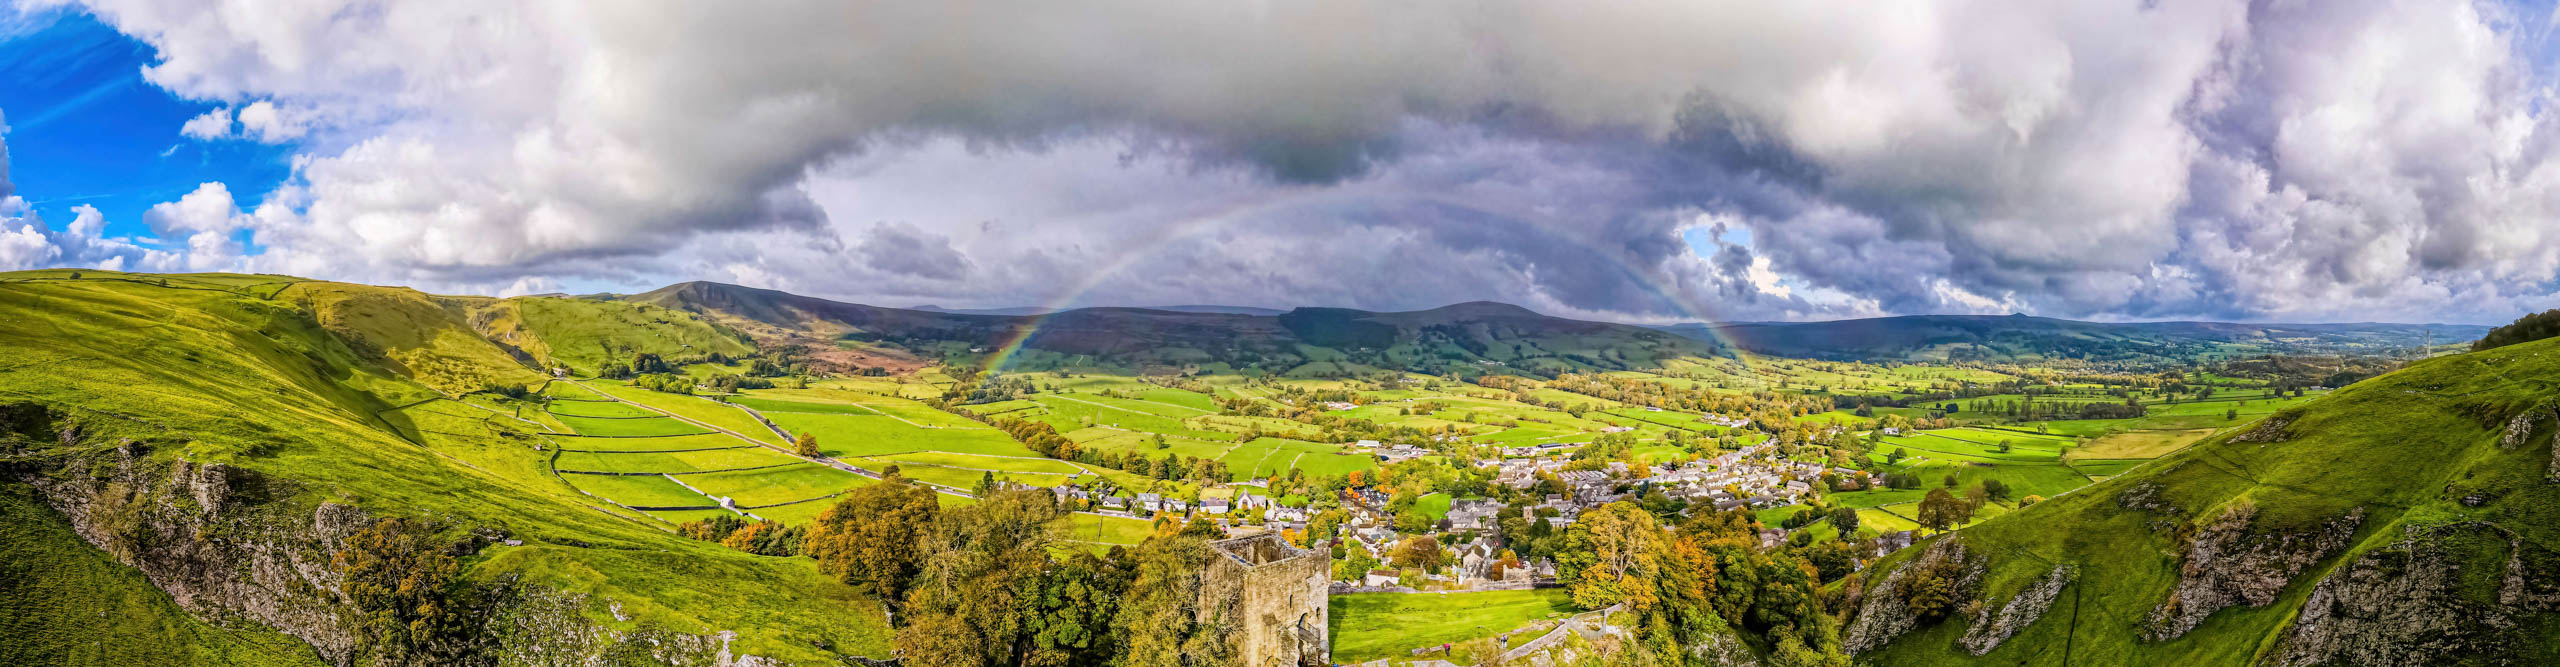 Rainbow and dark clouds over the hills of the Peak District and Peveril Castle, England 